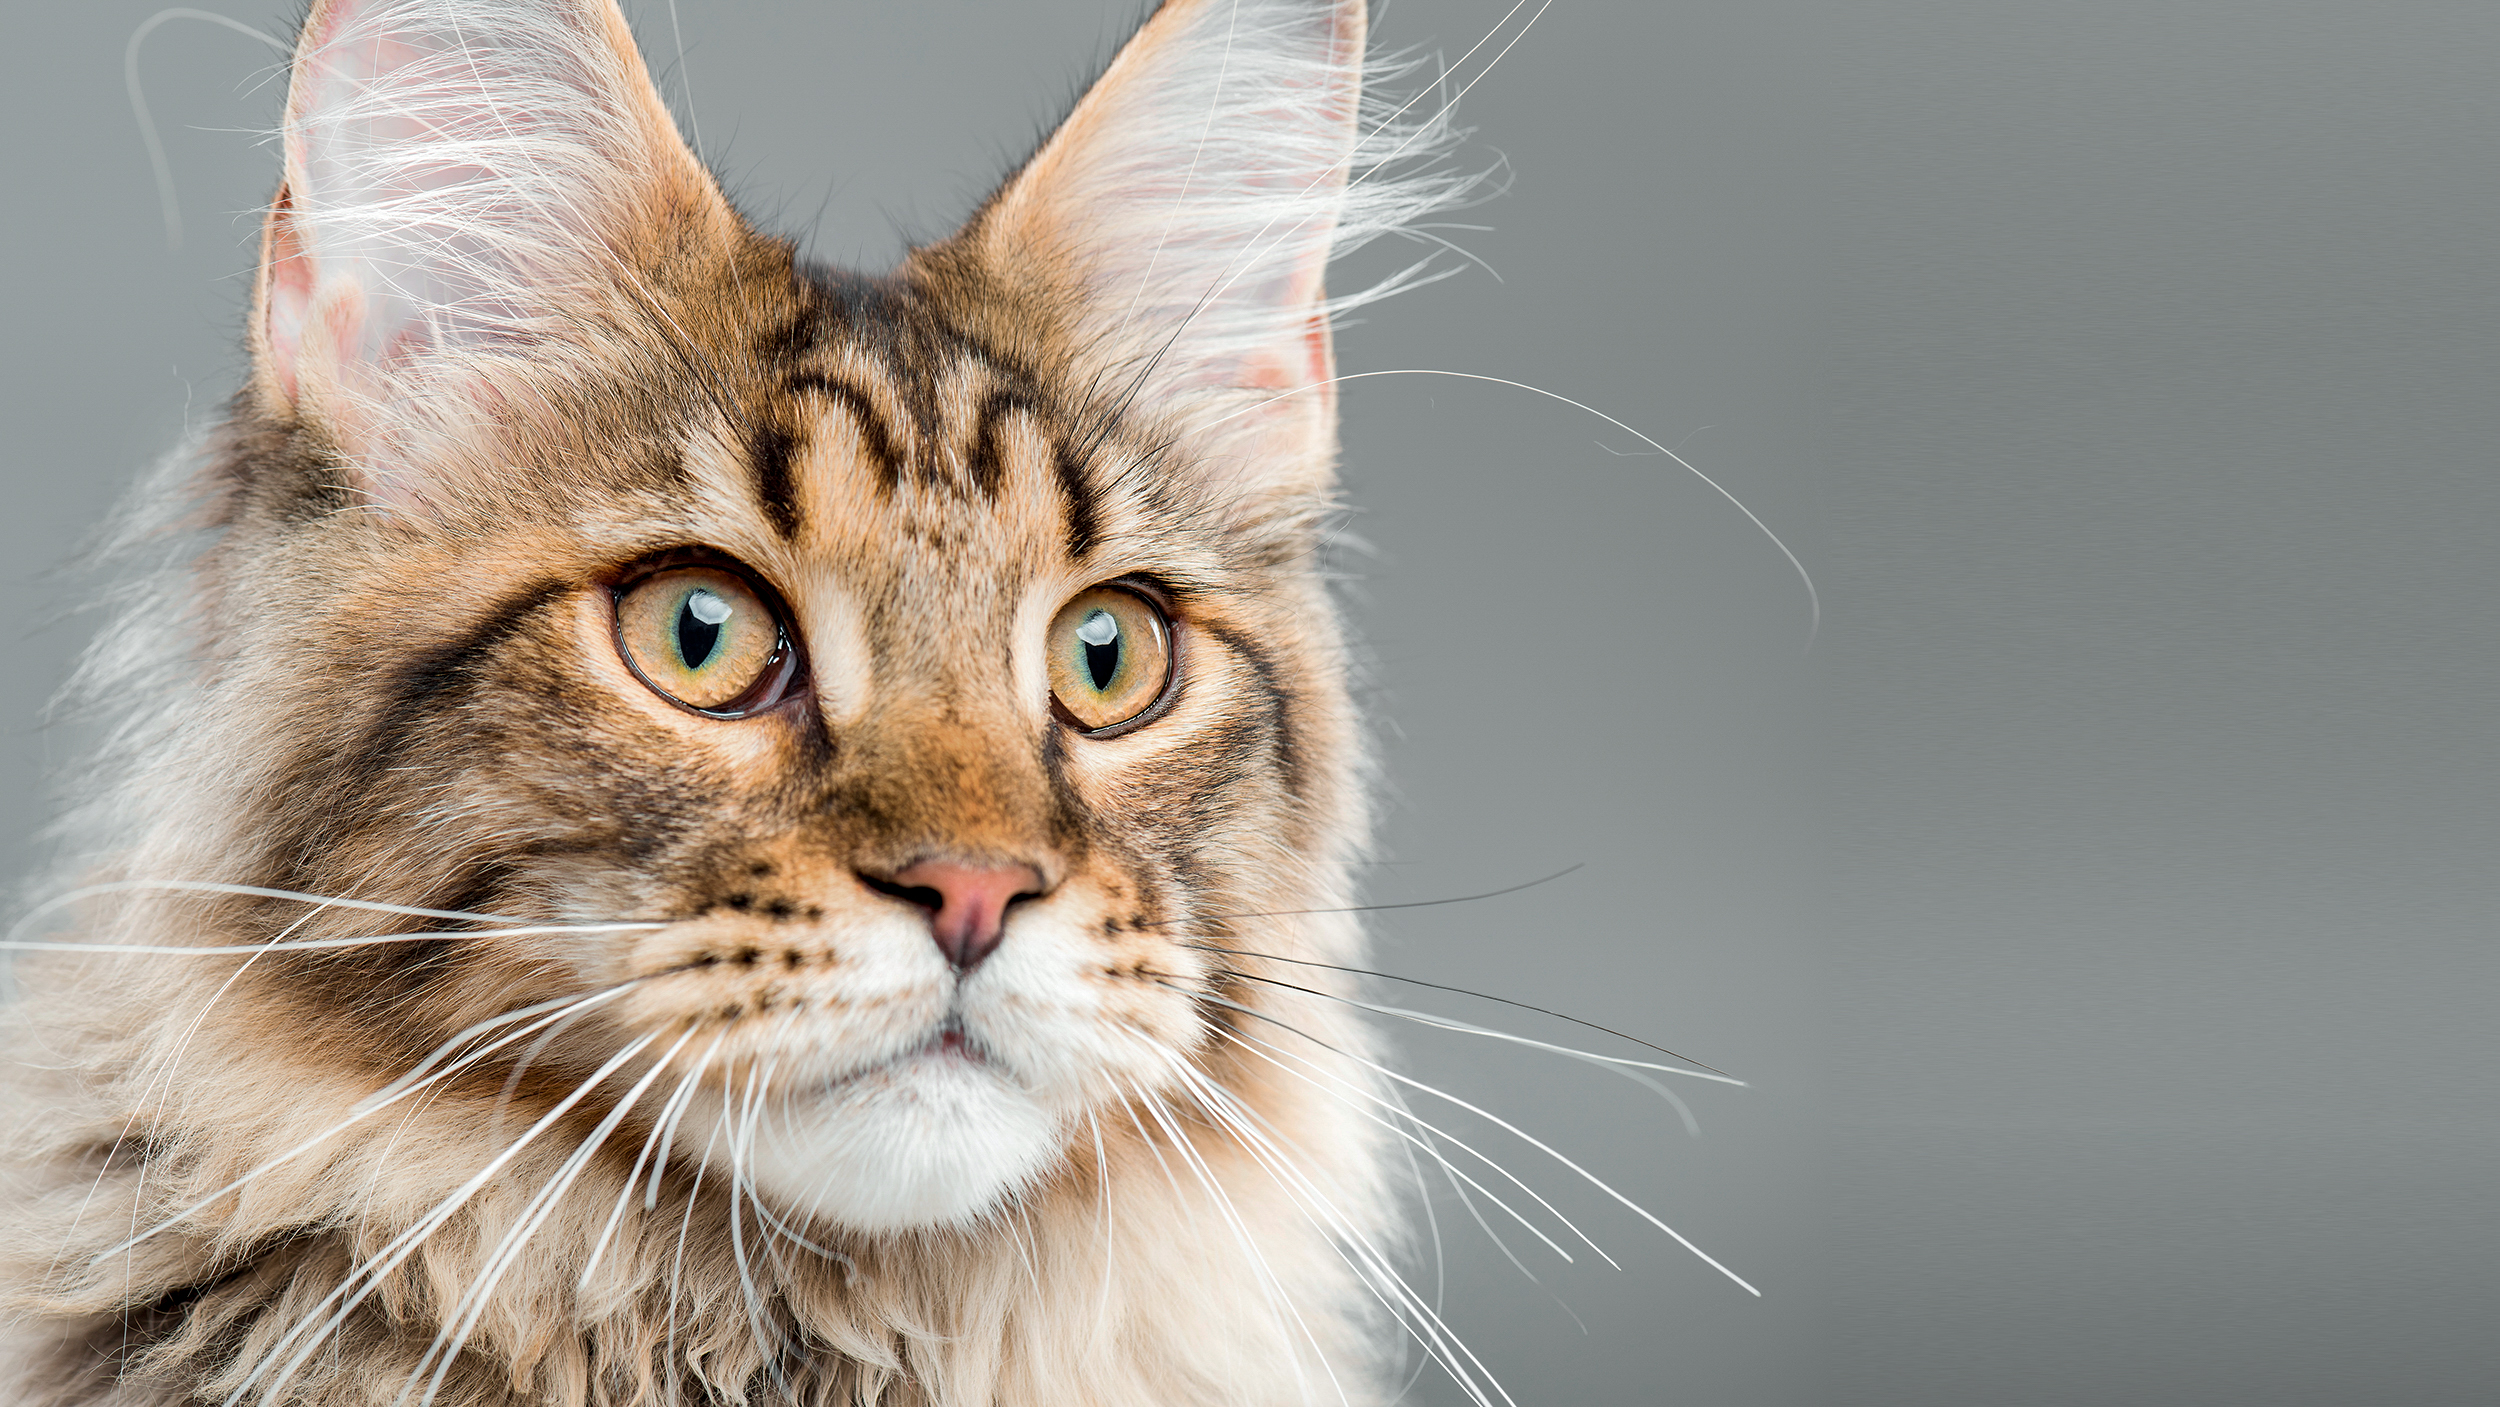 Kitten Maine Coon sitting against a grey background.